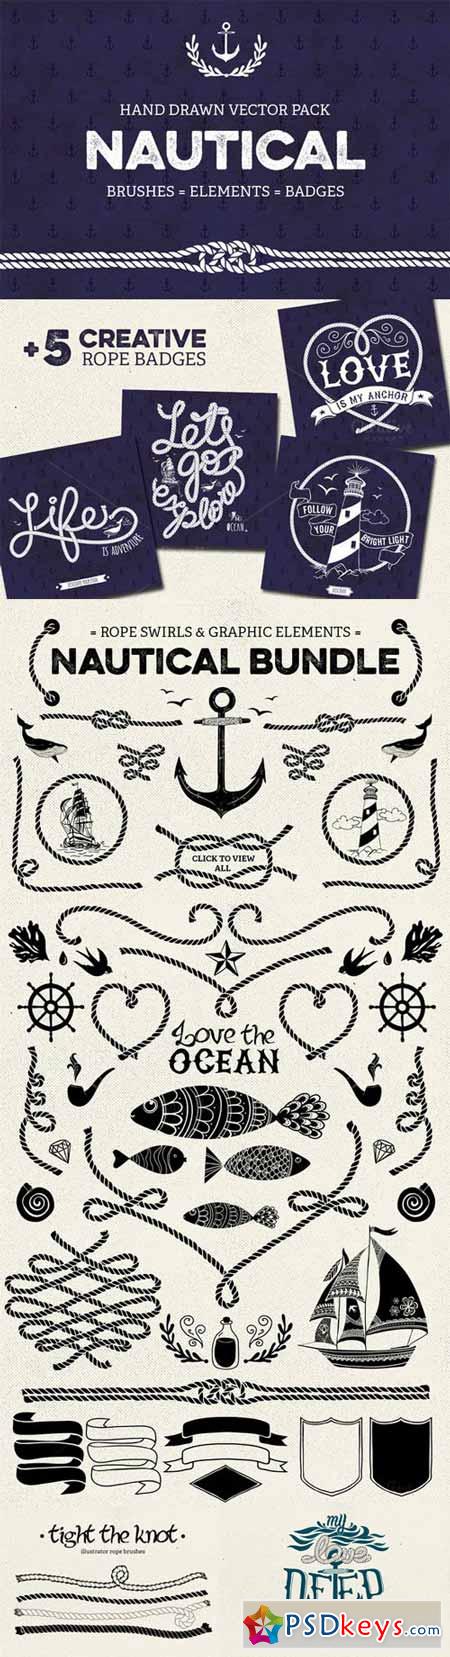 Nautical vector pack 141610